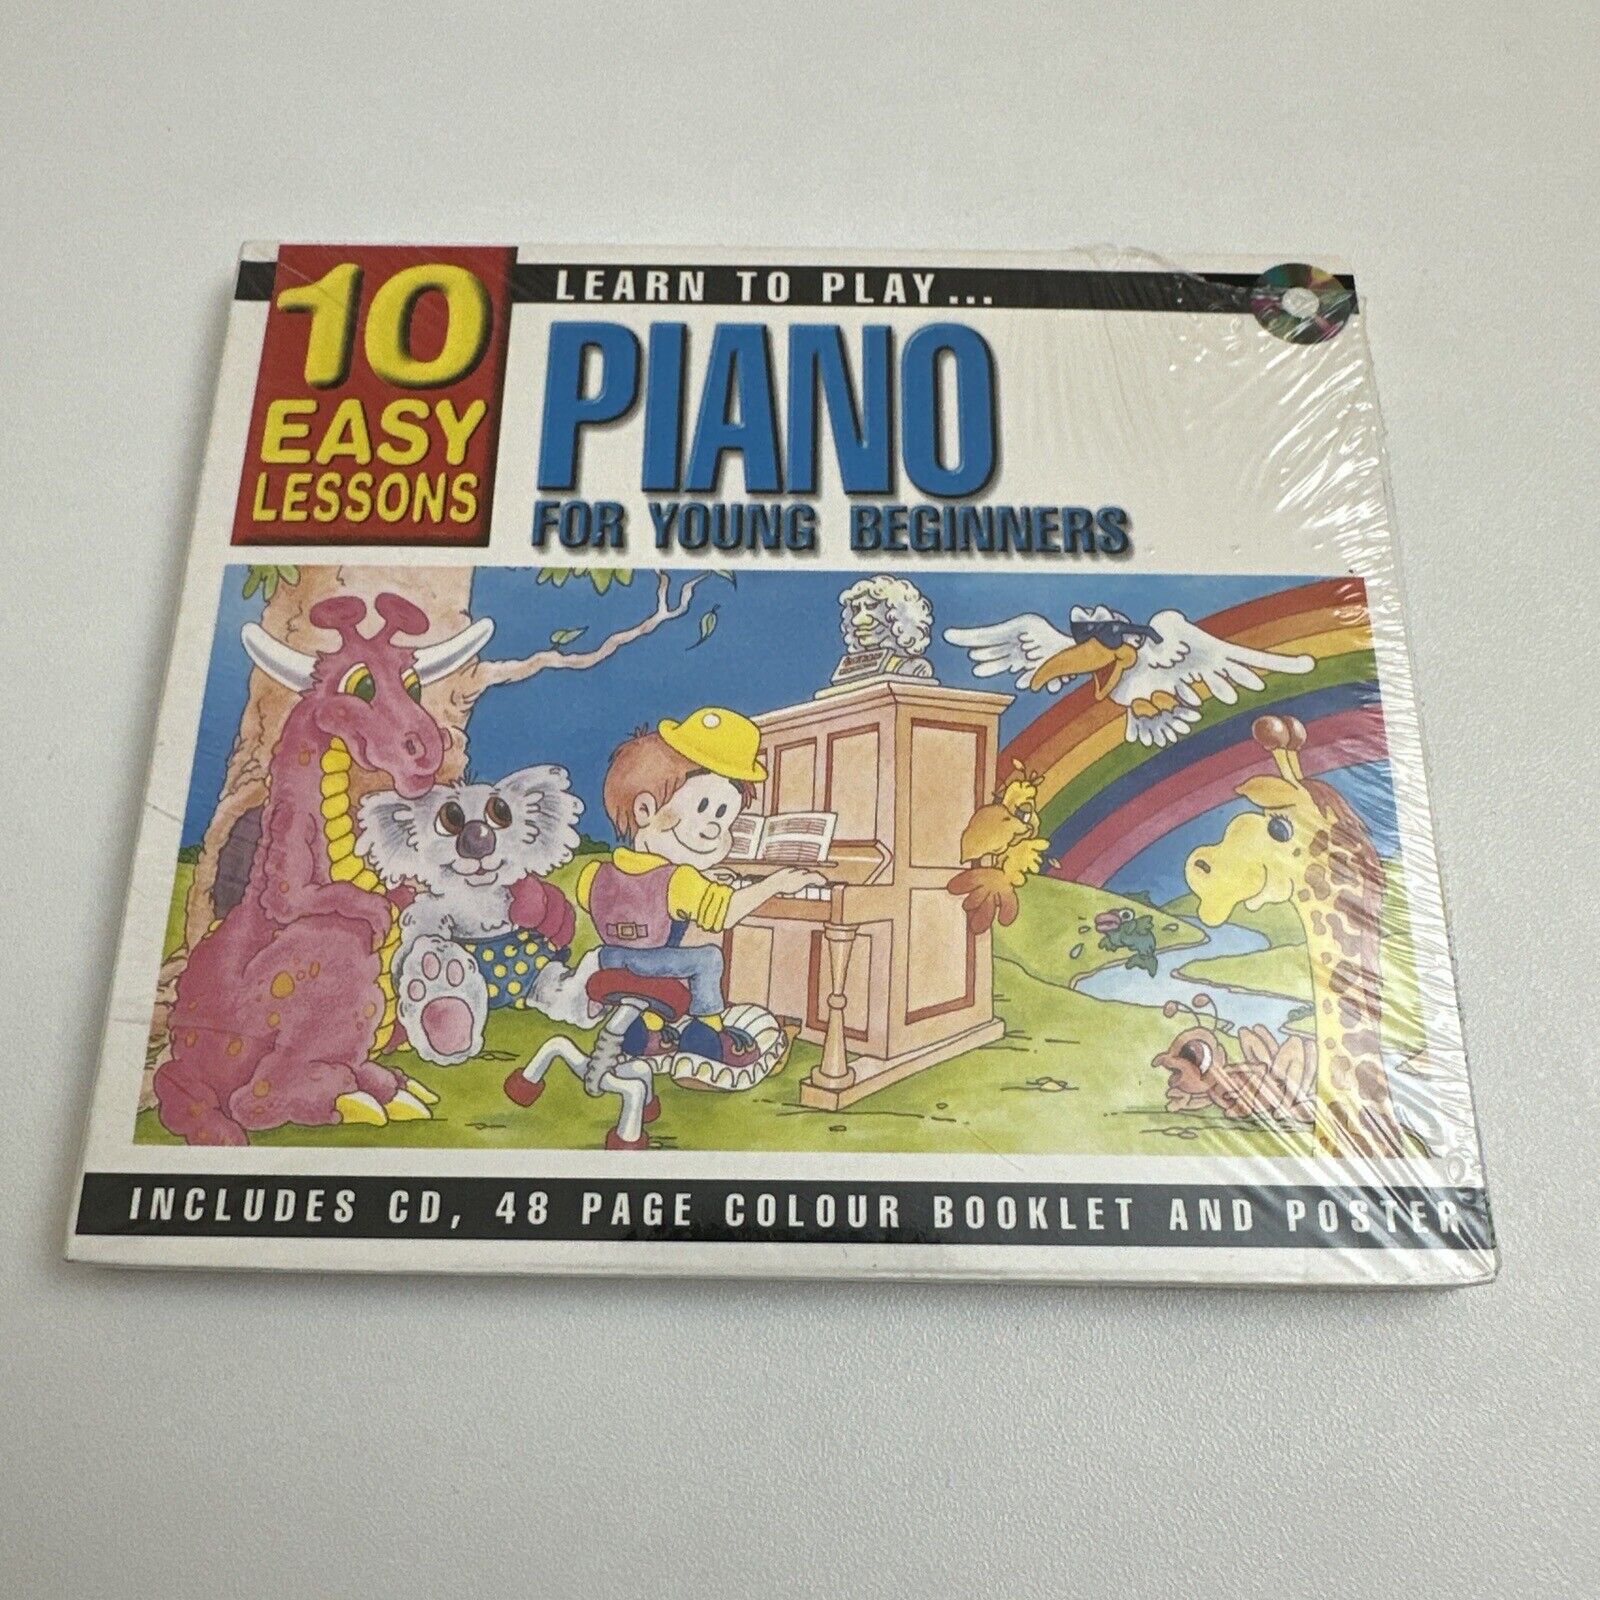 Learn to Play Piano for Young Beginners by Various Artists - New Sealed CD